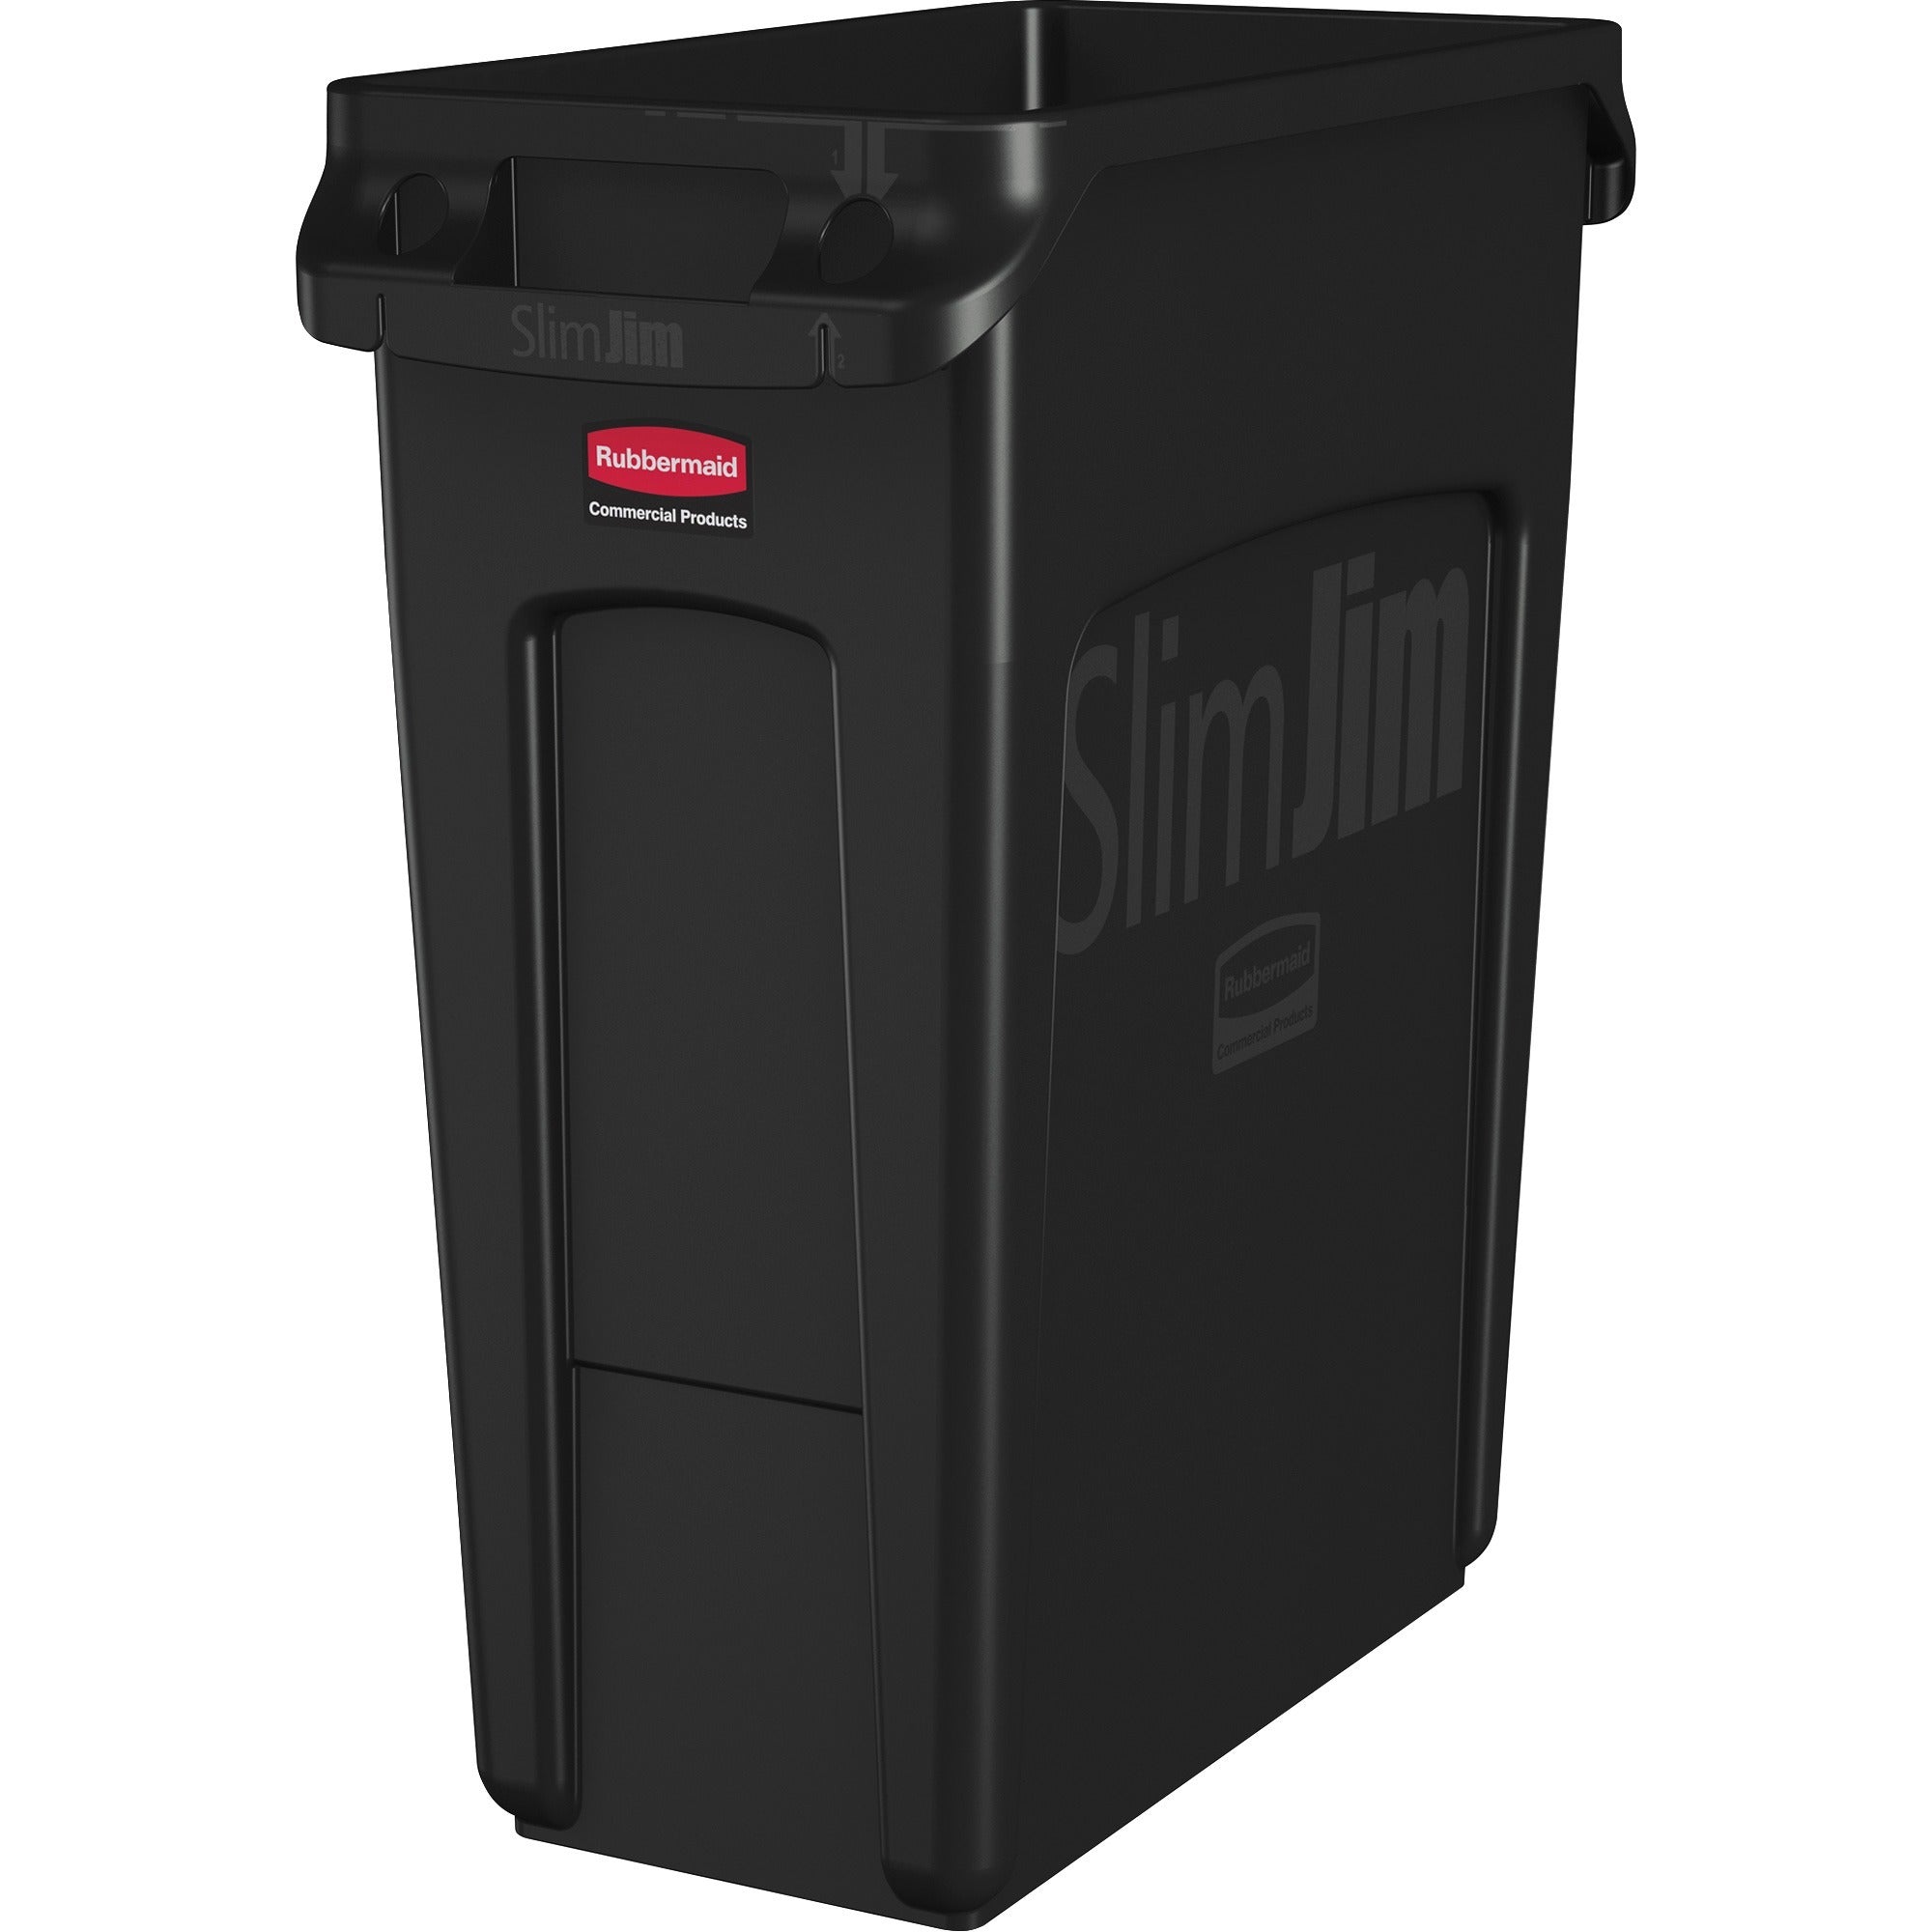 rubbermaid-commercial-slim-jim-16-gallon-vented-waste-containers-16-gal-capacity-rectangular-crush-resistant-durable-chemical-resistant-crush-resistant-recyclable-handle-25-height-x-11-width-x-22-depth-black-4-carton_rcp1955959ct - 1